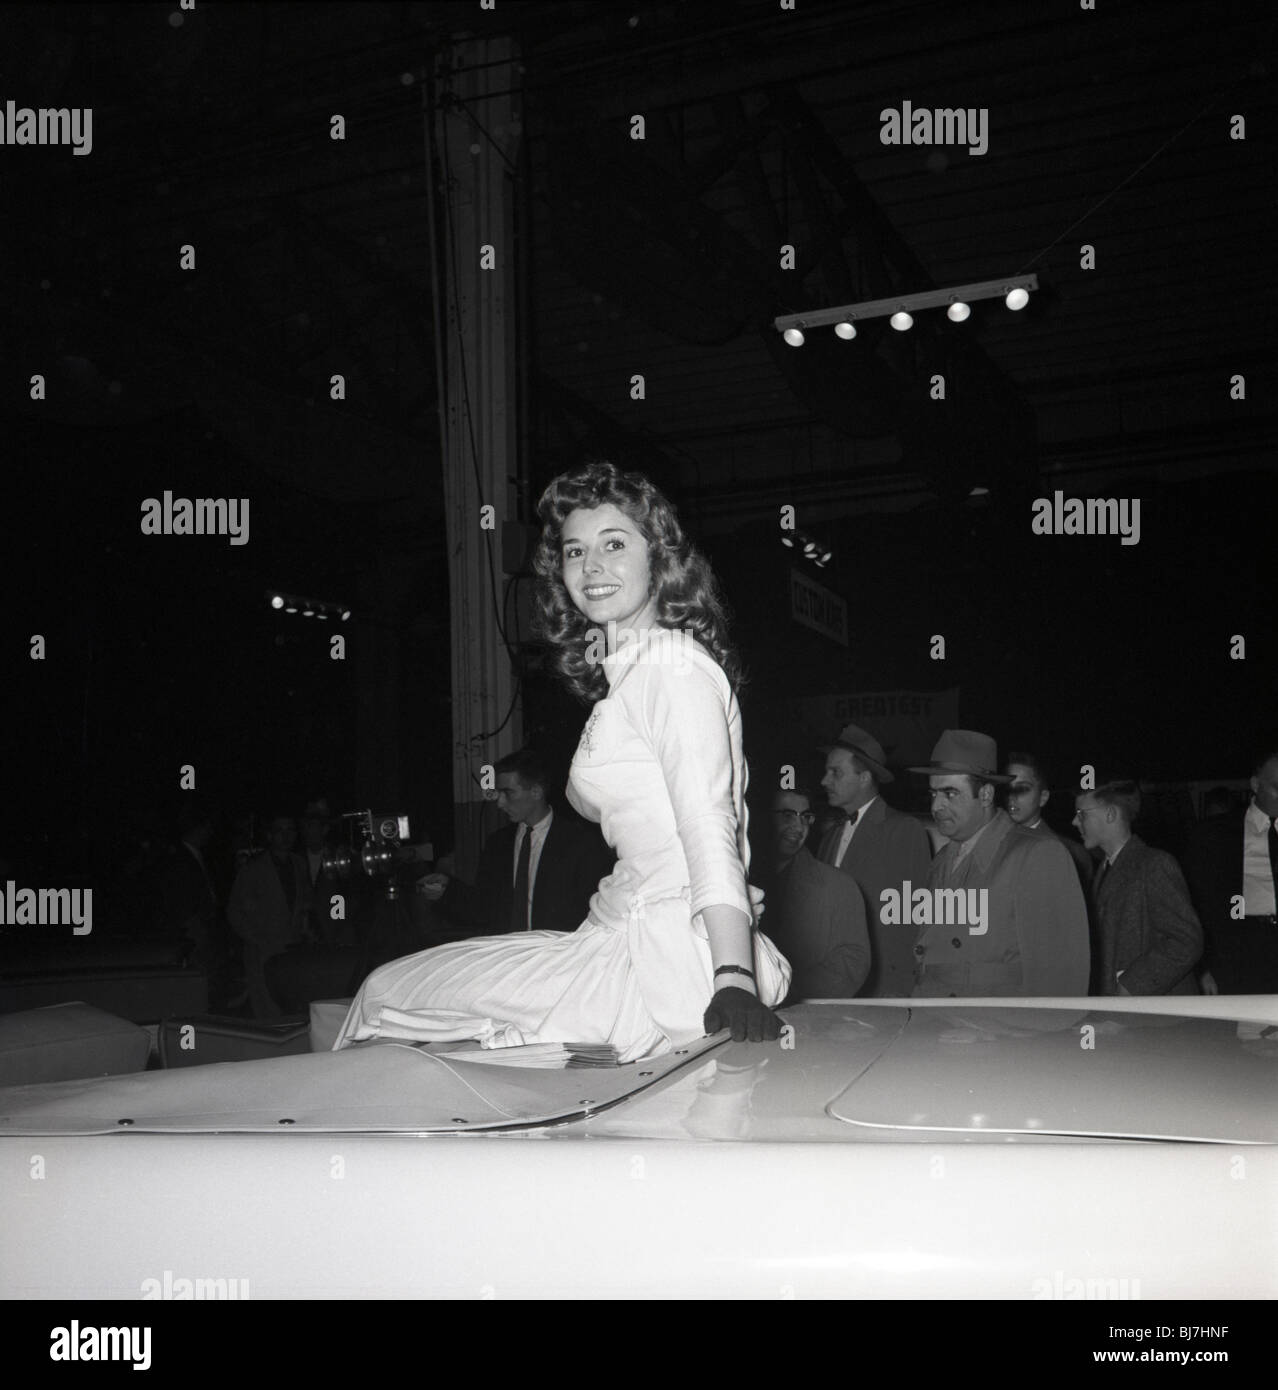 Pretty woman in dress sits on top car during car show in Philadelphia area in the late 1960s. Stock Photo